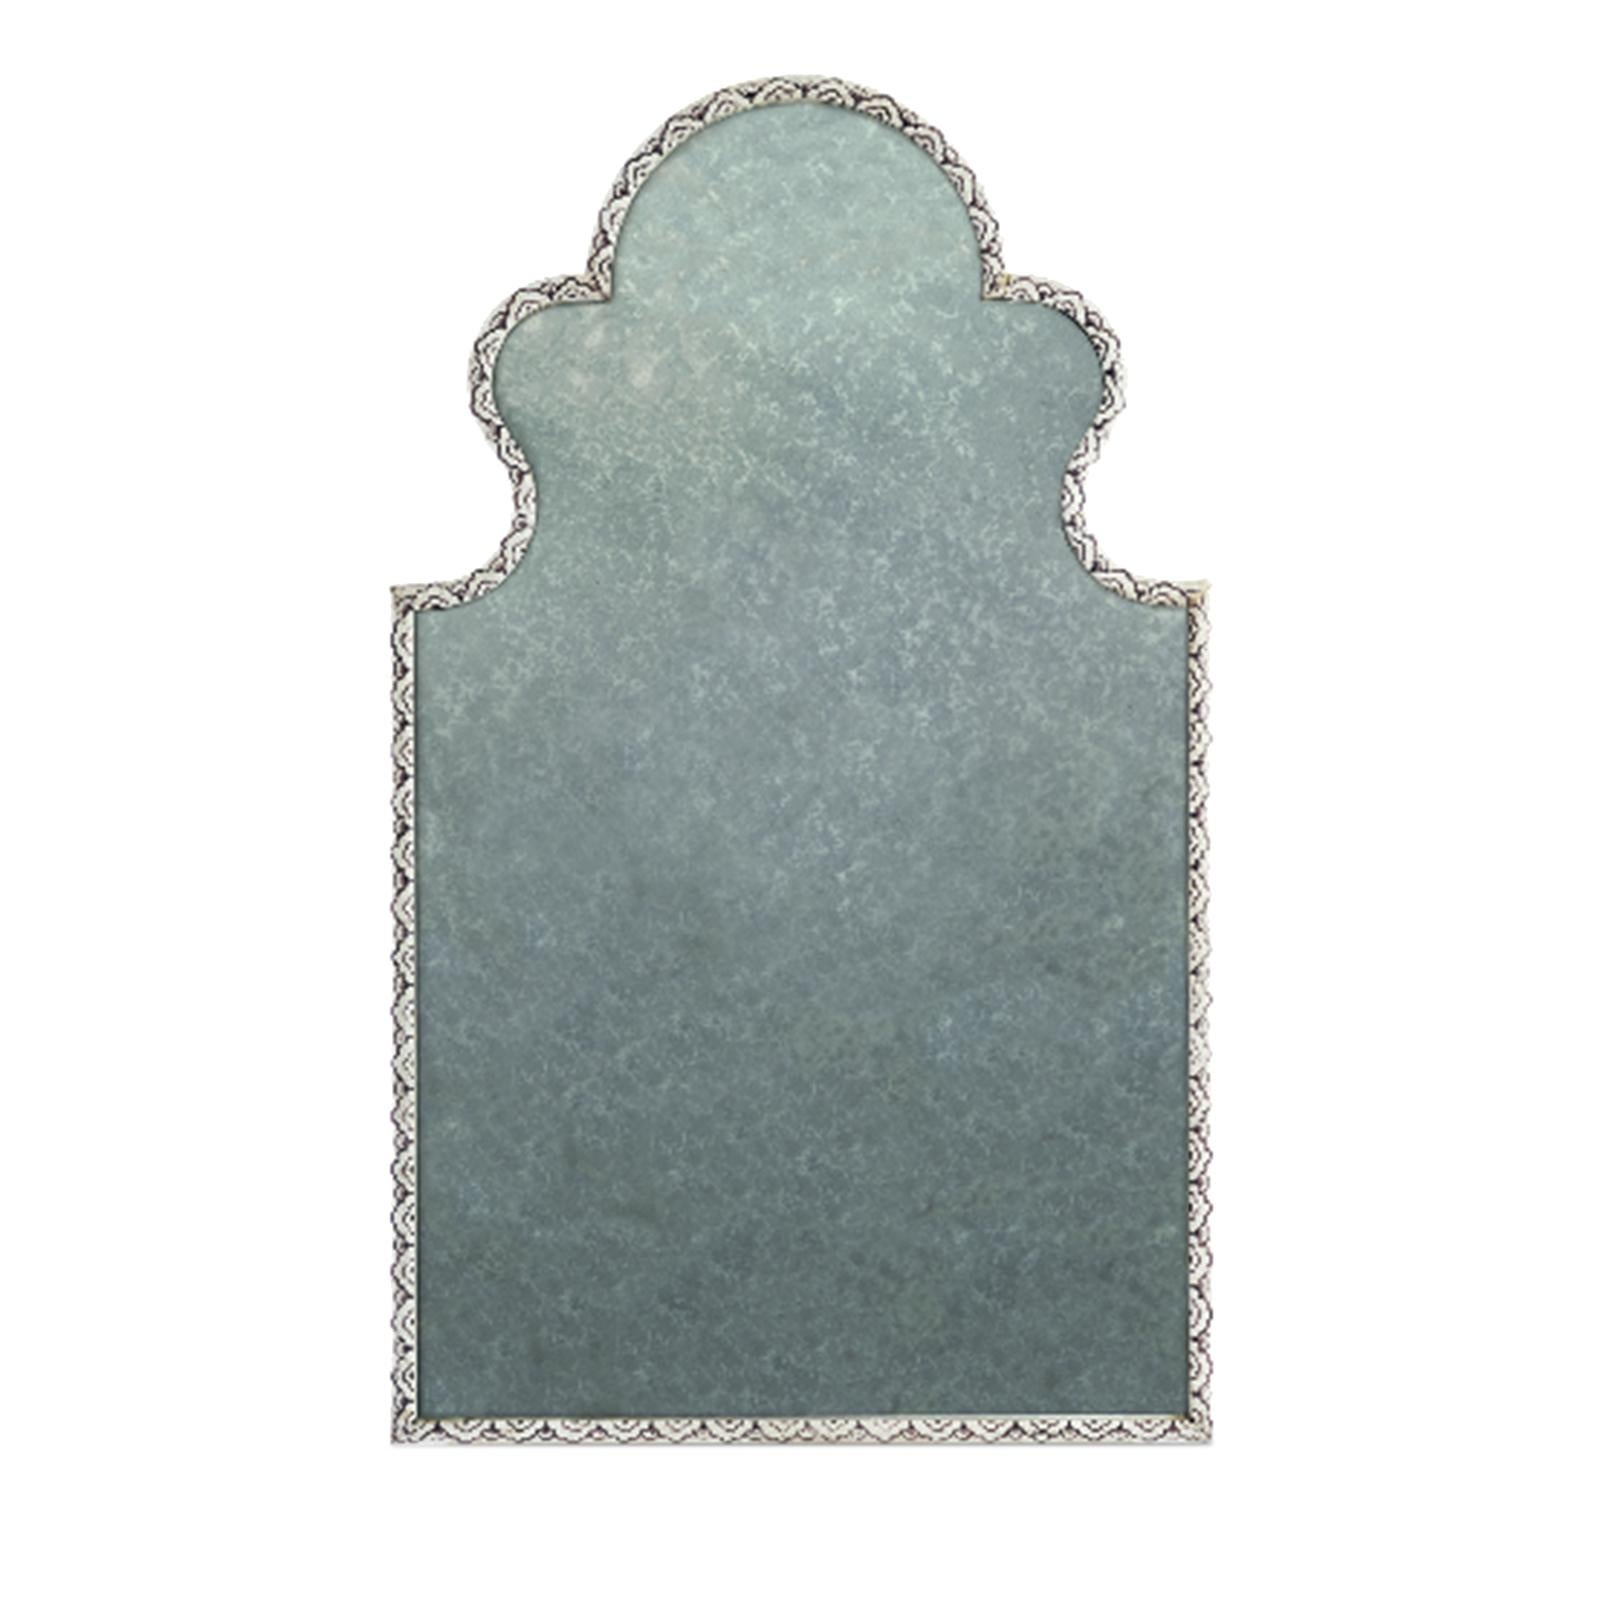 Inspired by the Venetian windows that bear the trademark of Palladio's work, this perfectly symmetric mirror has wooden frame with an arched top and scalloped edges. The eye-catching silhouette is enhanced by the white finish that is hand decorated